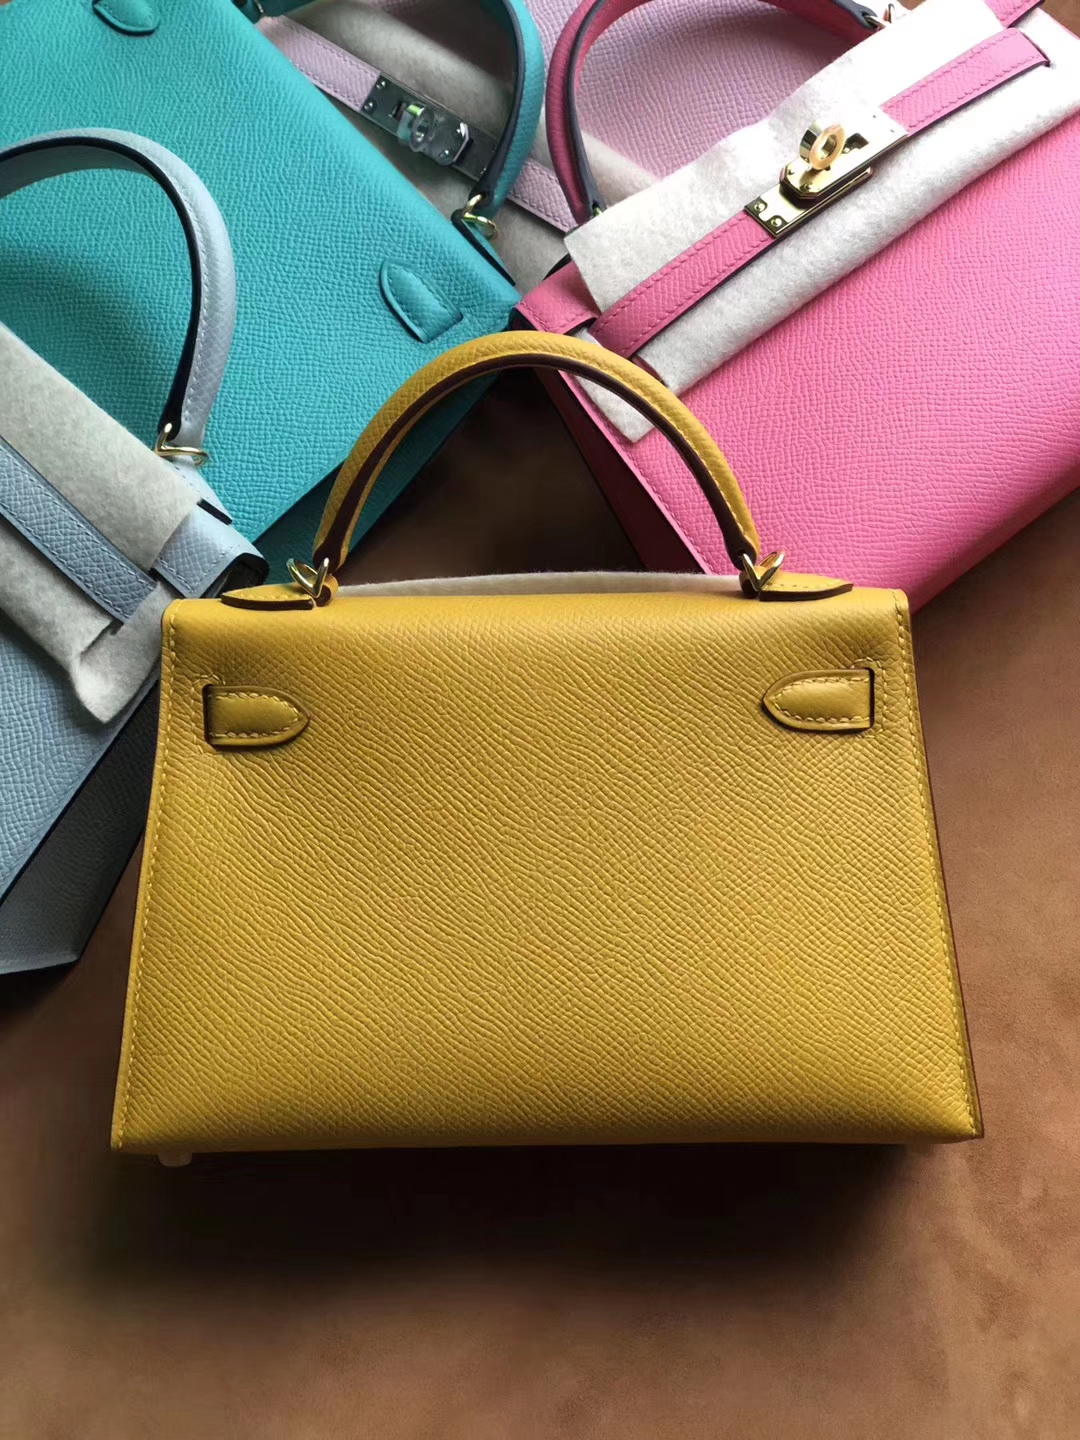 Stock Hermes 9D Ambre Yellow Epsom Calf Minikelly-2 Clutch Bag Gold ...